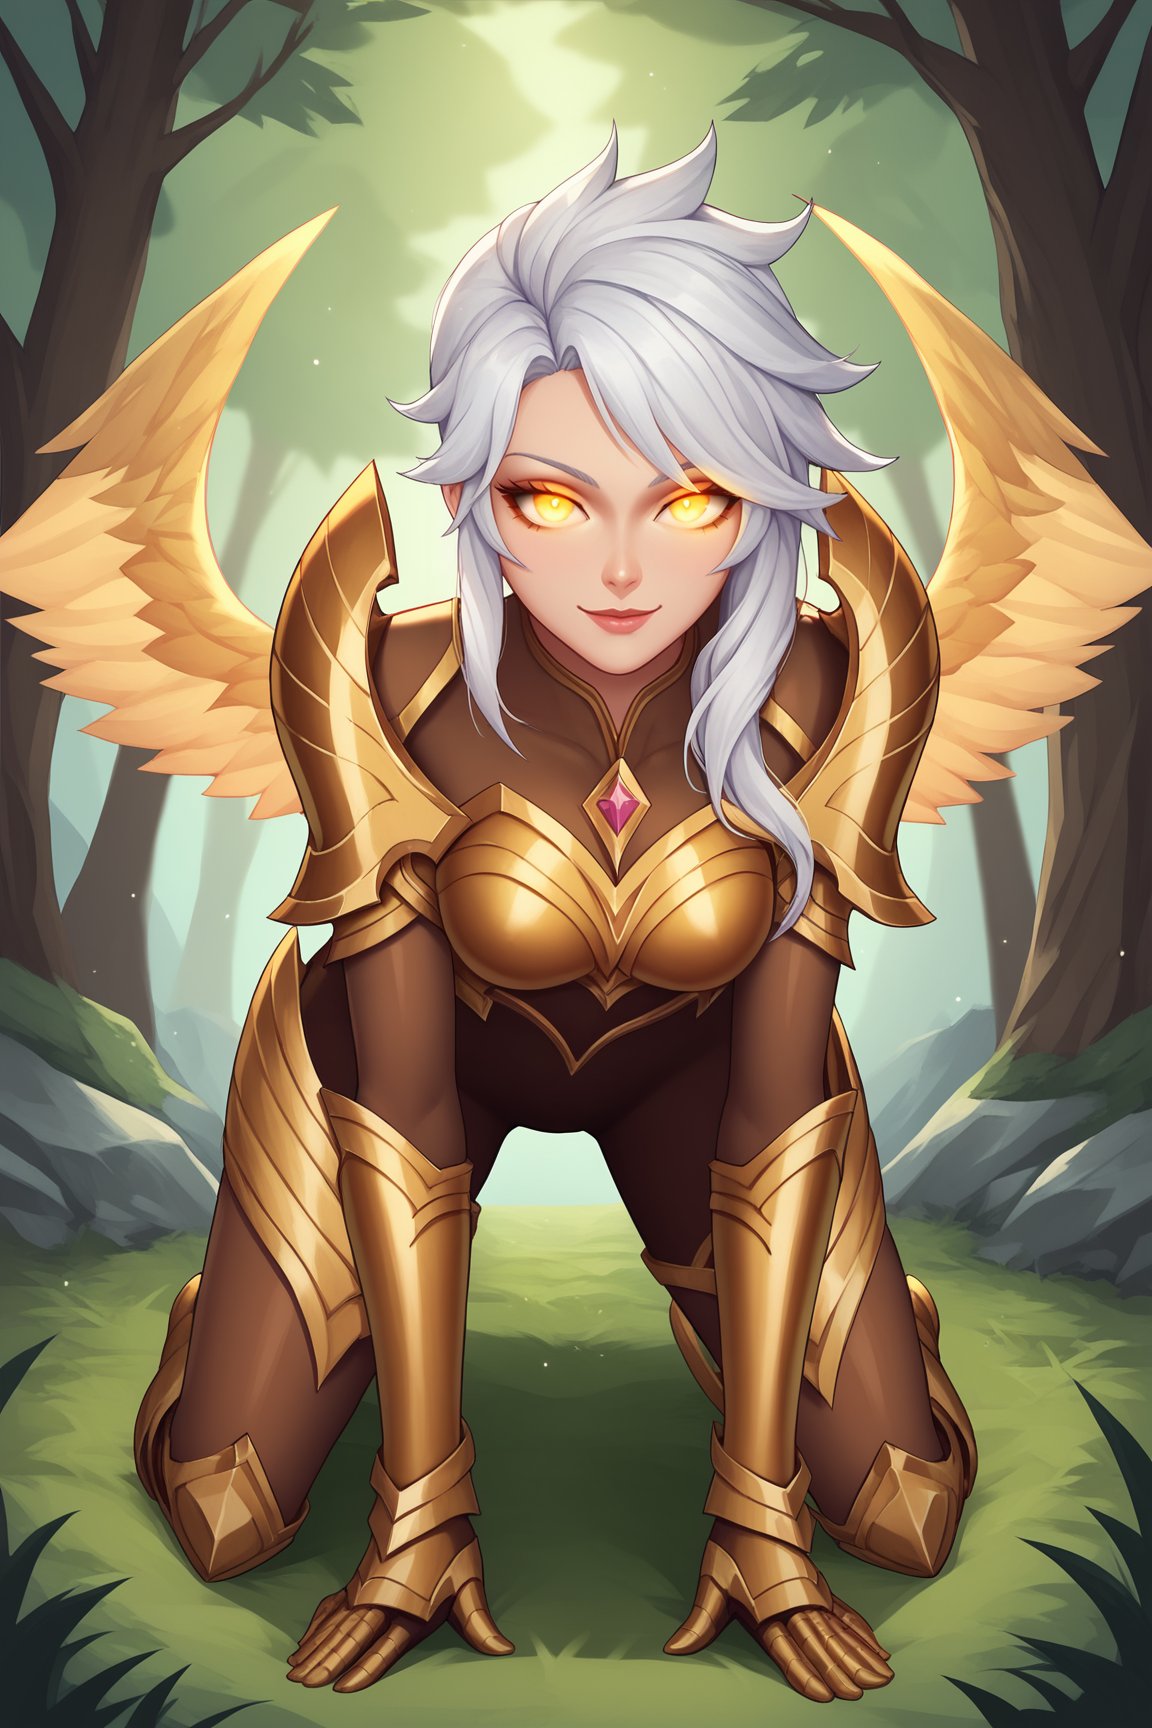 score_9, score_8_up, score_7_up, score_6_up, score_5_up, score_4_up, BREAK, KayleLoLXL, glowing eyes, yellow eyes, white hair, long hair, bangs, medium breasts, yellow wings, gold armor, gold shoulder armor, arm armor, gold gloves, gold breastplate, brown bodysuit, gold leg armor, gold armored boots, solo, full body, all fours, seductive smile, looking at viewer, forest, tree <lora:KayleLoLXL:0.9>